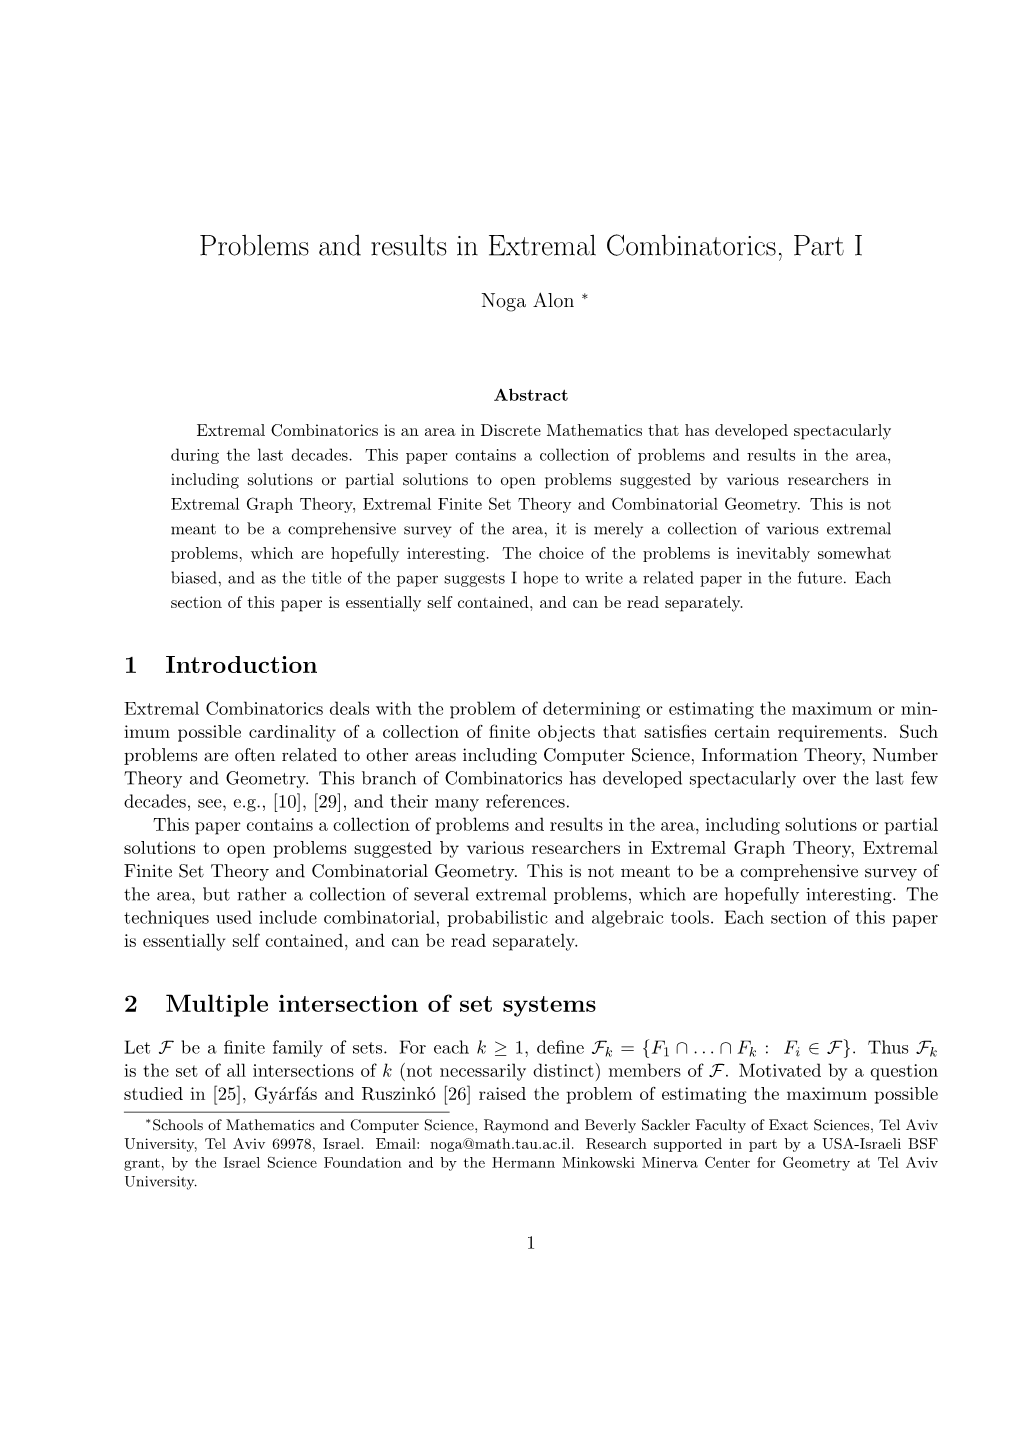 Problems and Results in Extremal Combinatorics, Part I